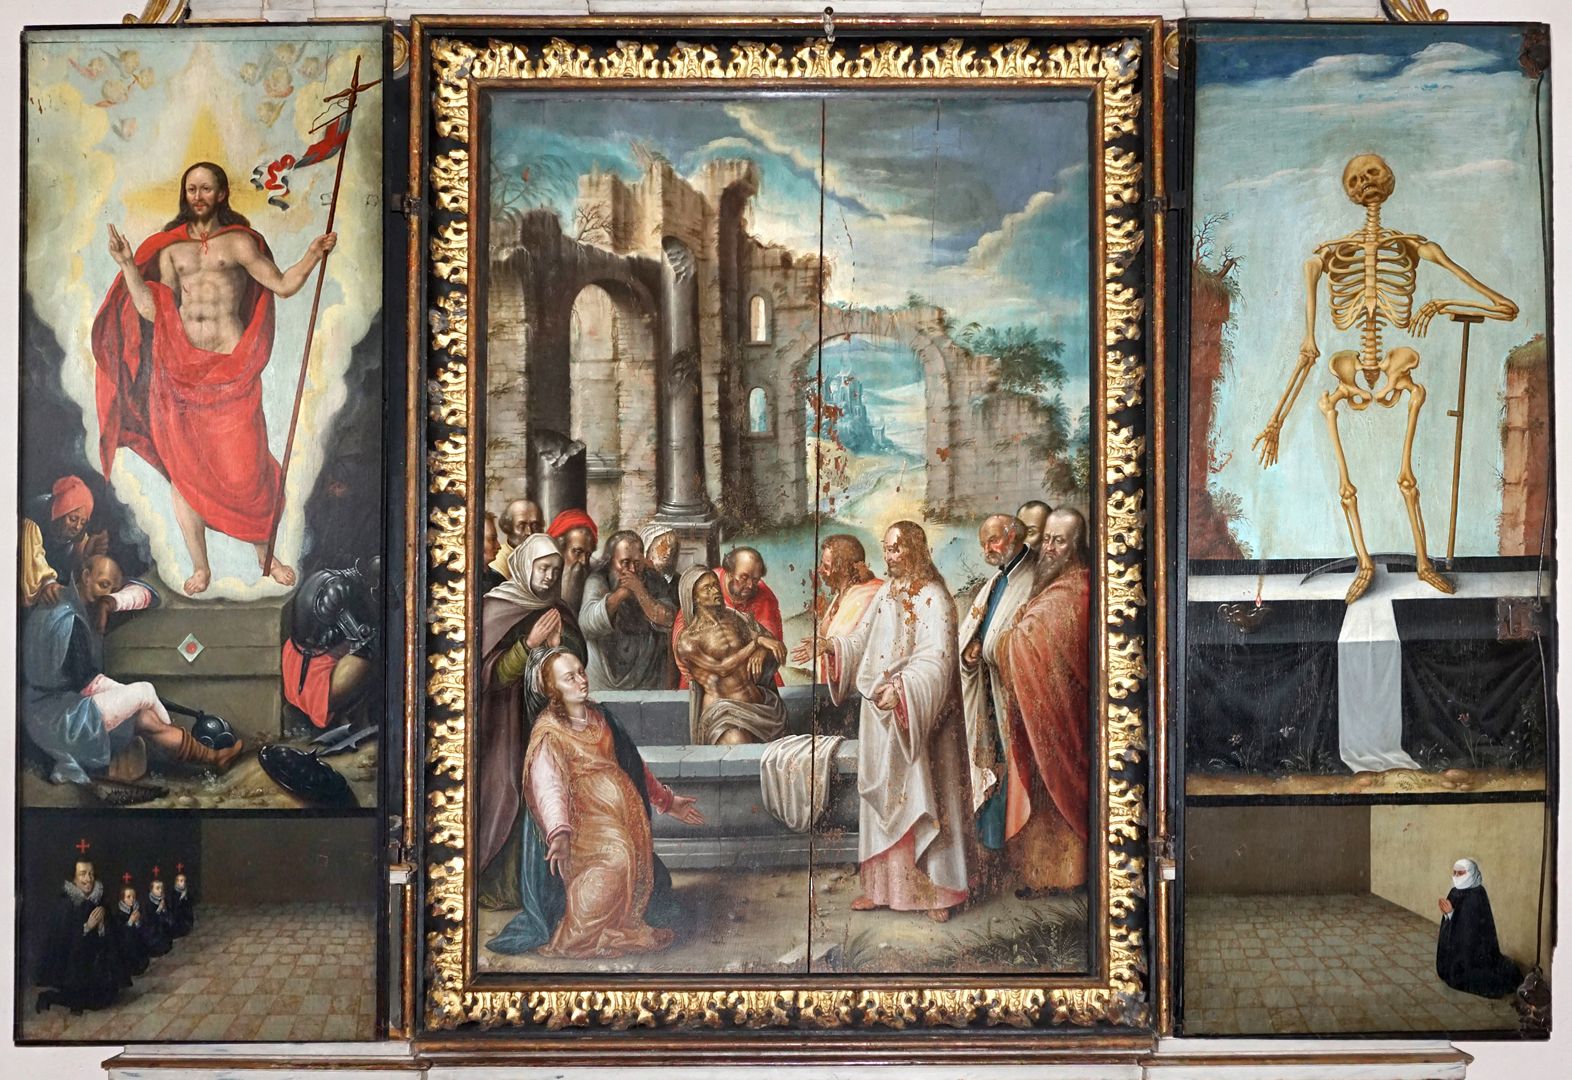 Painting epitaph for Sigmund Herel Middle picture with the raising of Lazarus, left: Resurrection of Jesus, below Sigmund Herel with his sons / right: Death with scythe, below Dorotha Herel